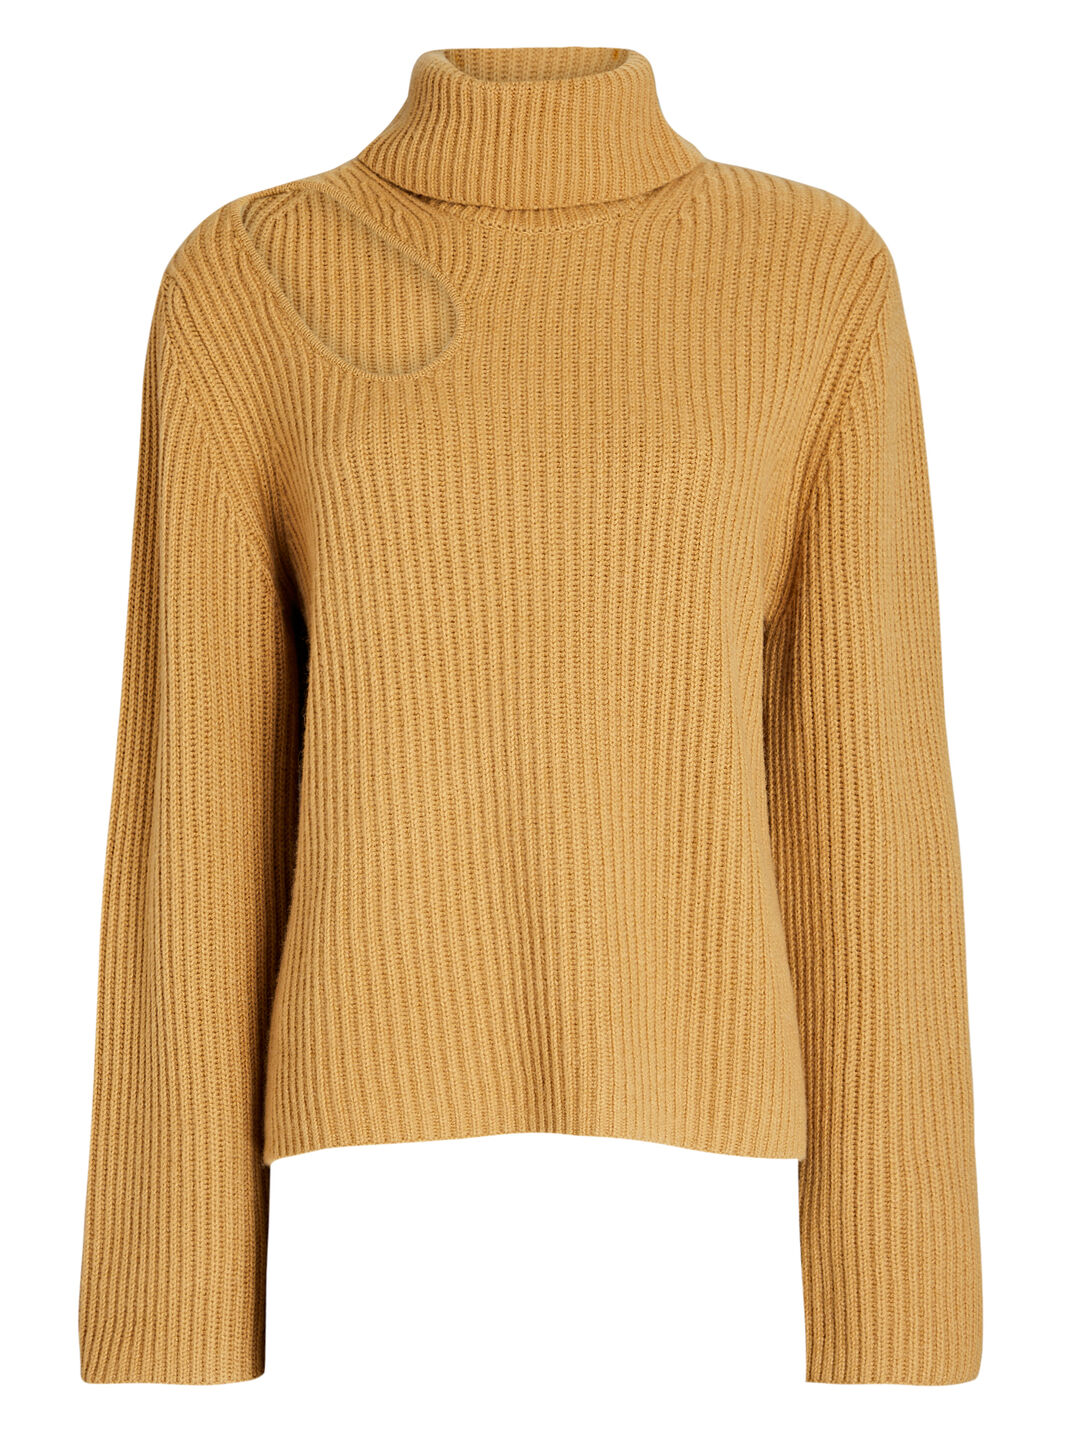 Dustin Cut-Out Recycled Cashmere Sweater